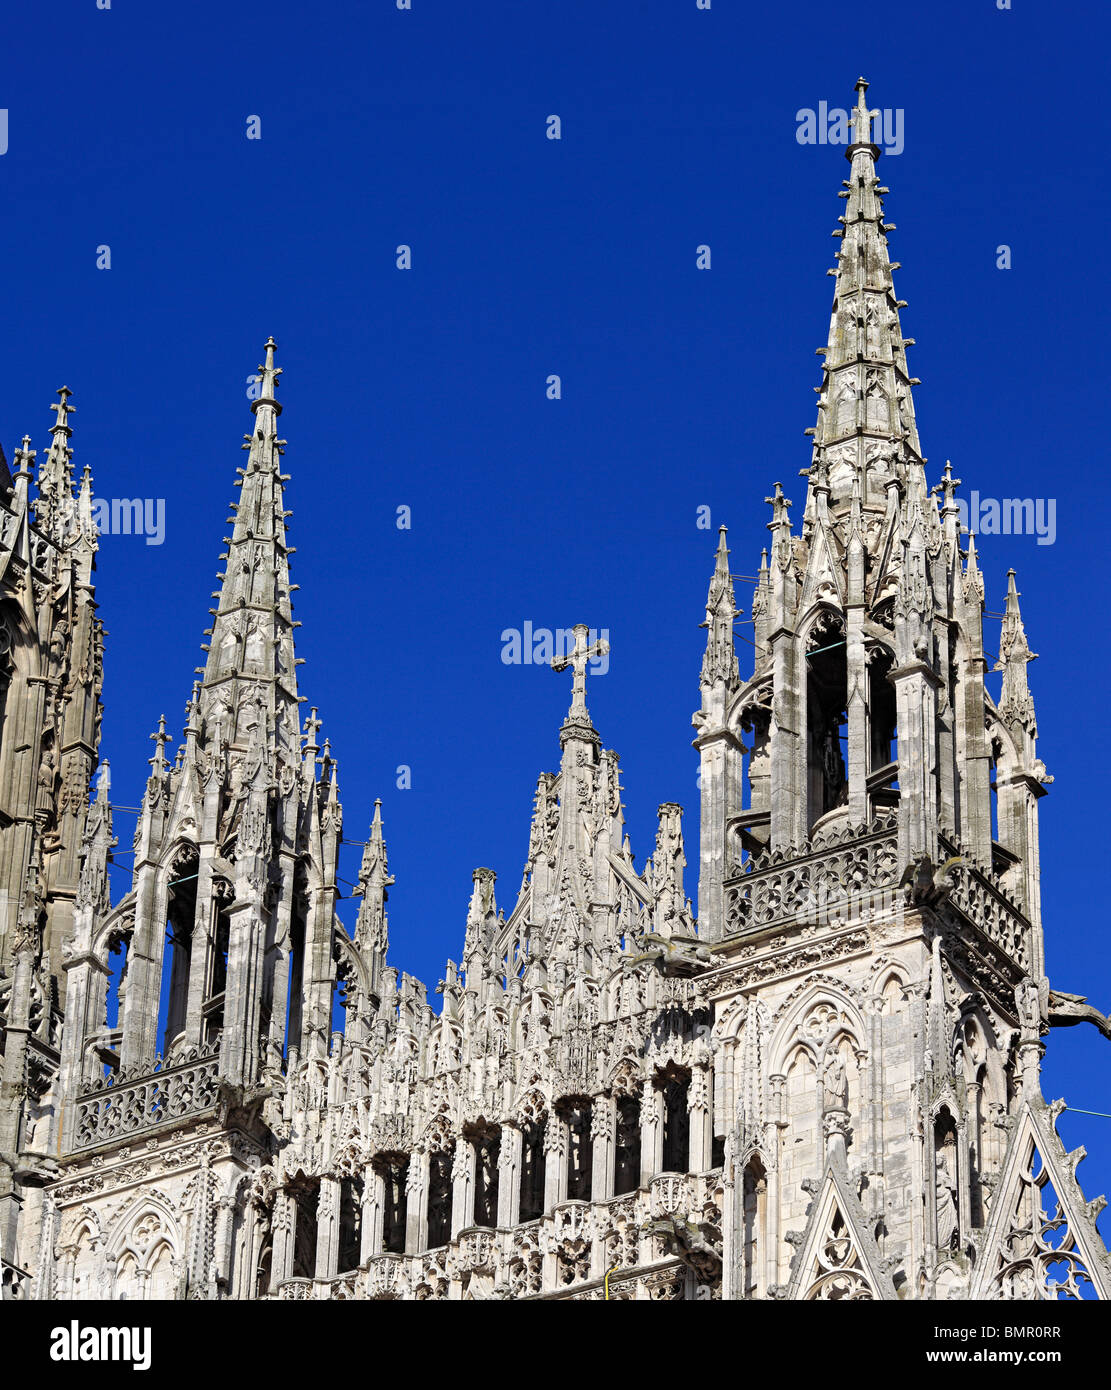 Rouen cathedral, Rouen, Seine-Maritime department, Upper Normandy, France Stock Photo